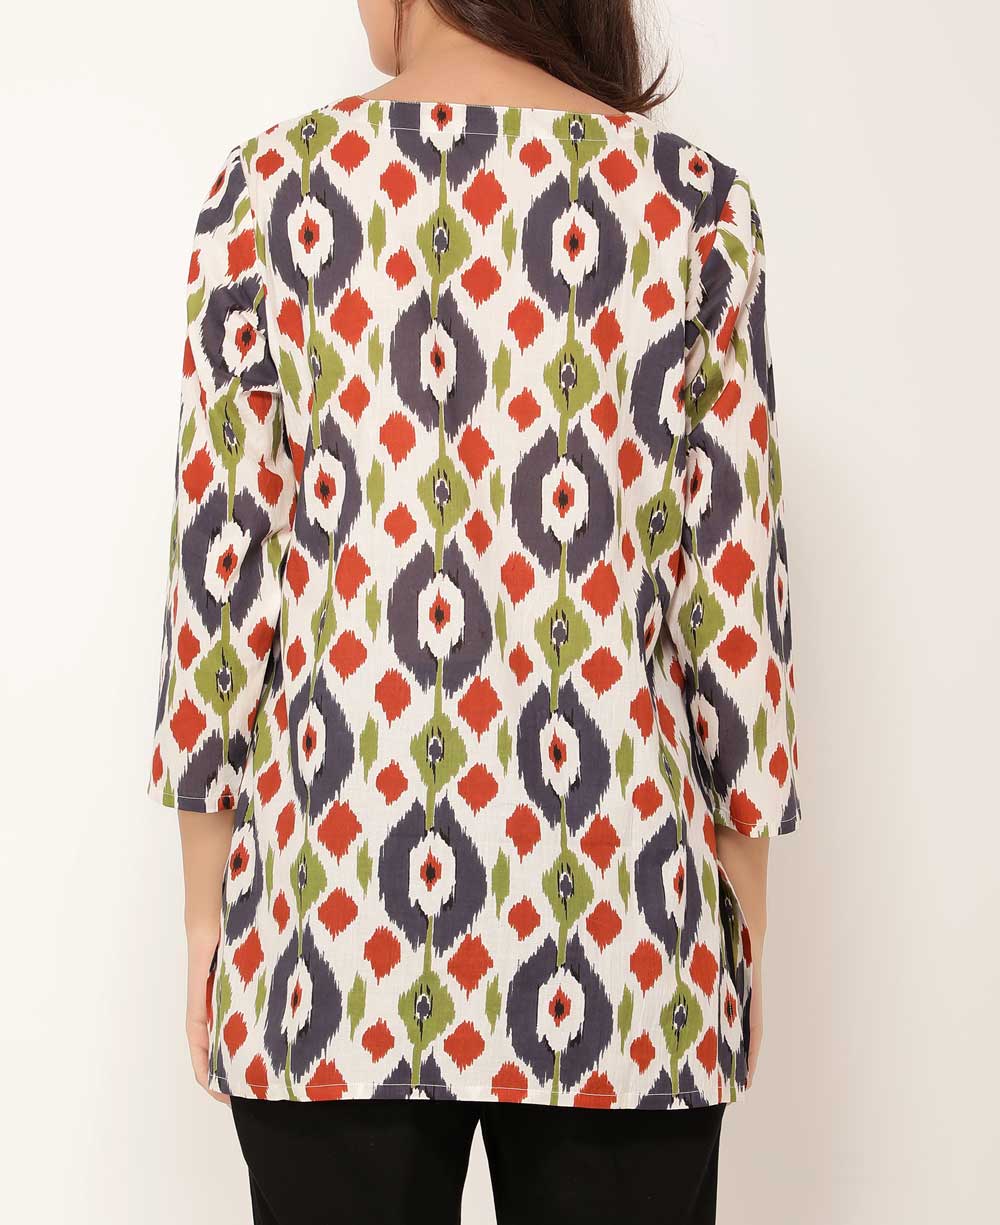 Tropical Geometry Lightweight Cotton Tunic Top - Apparel S